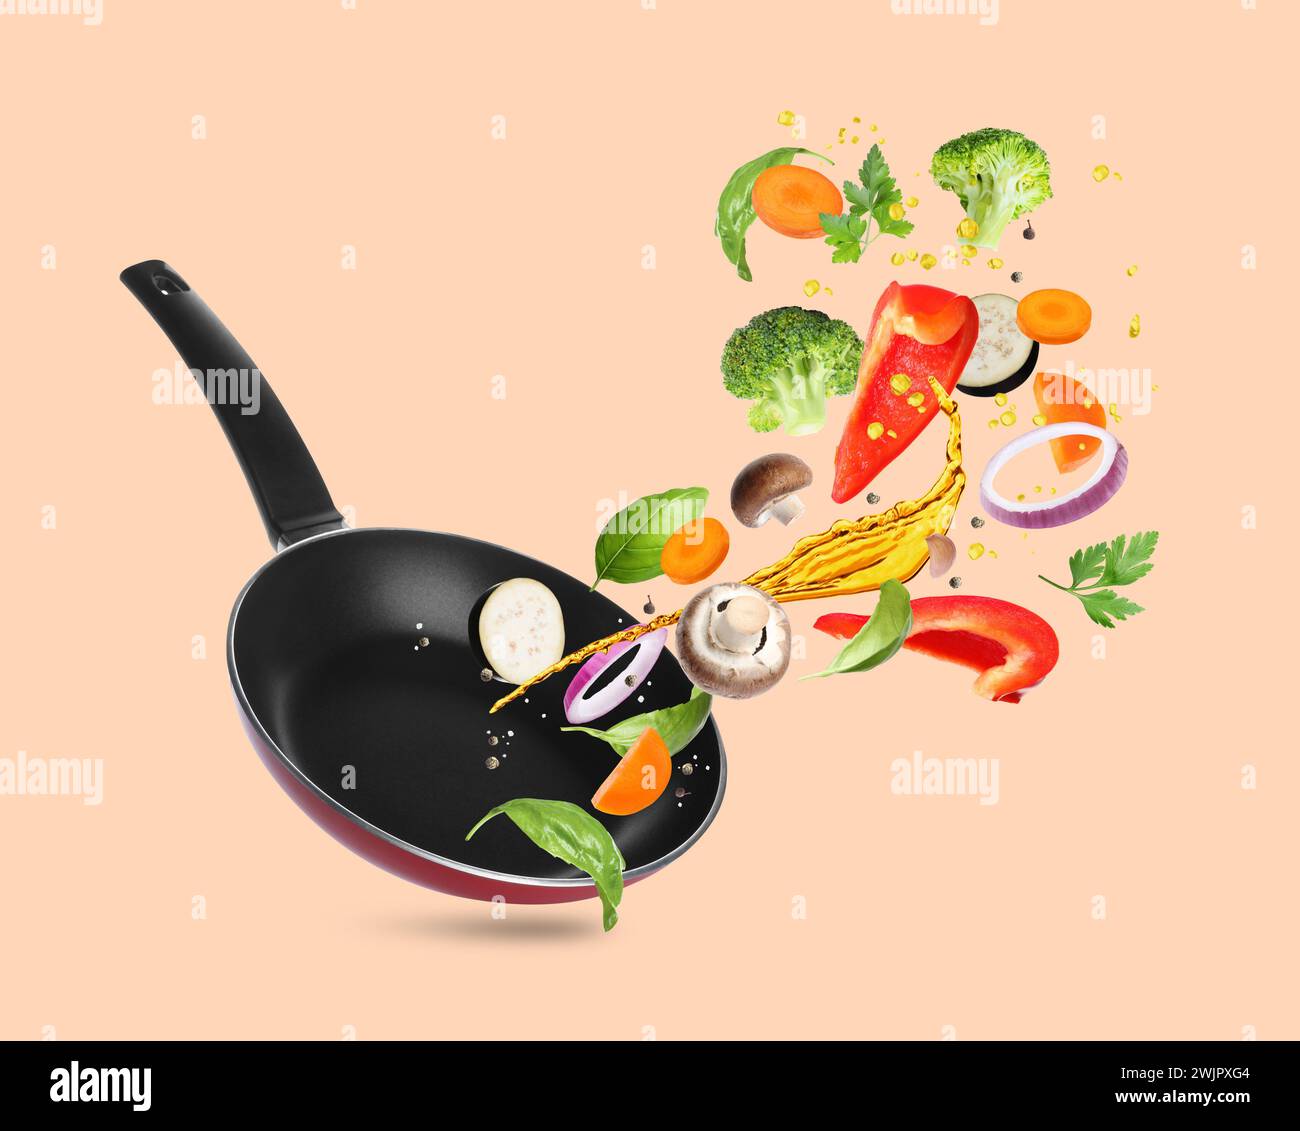 Different vegetables, oil, frying pan in air on pale coral background Stock Photo